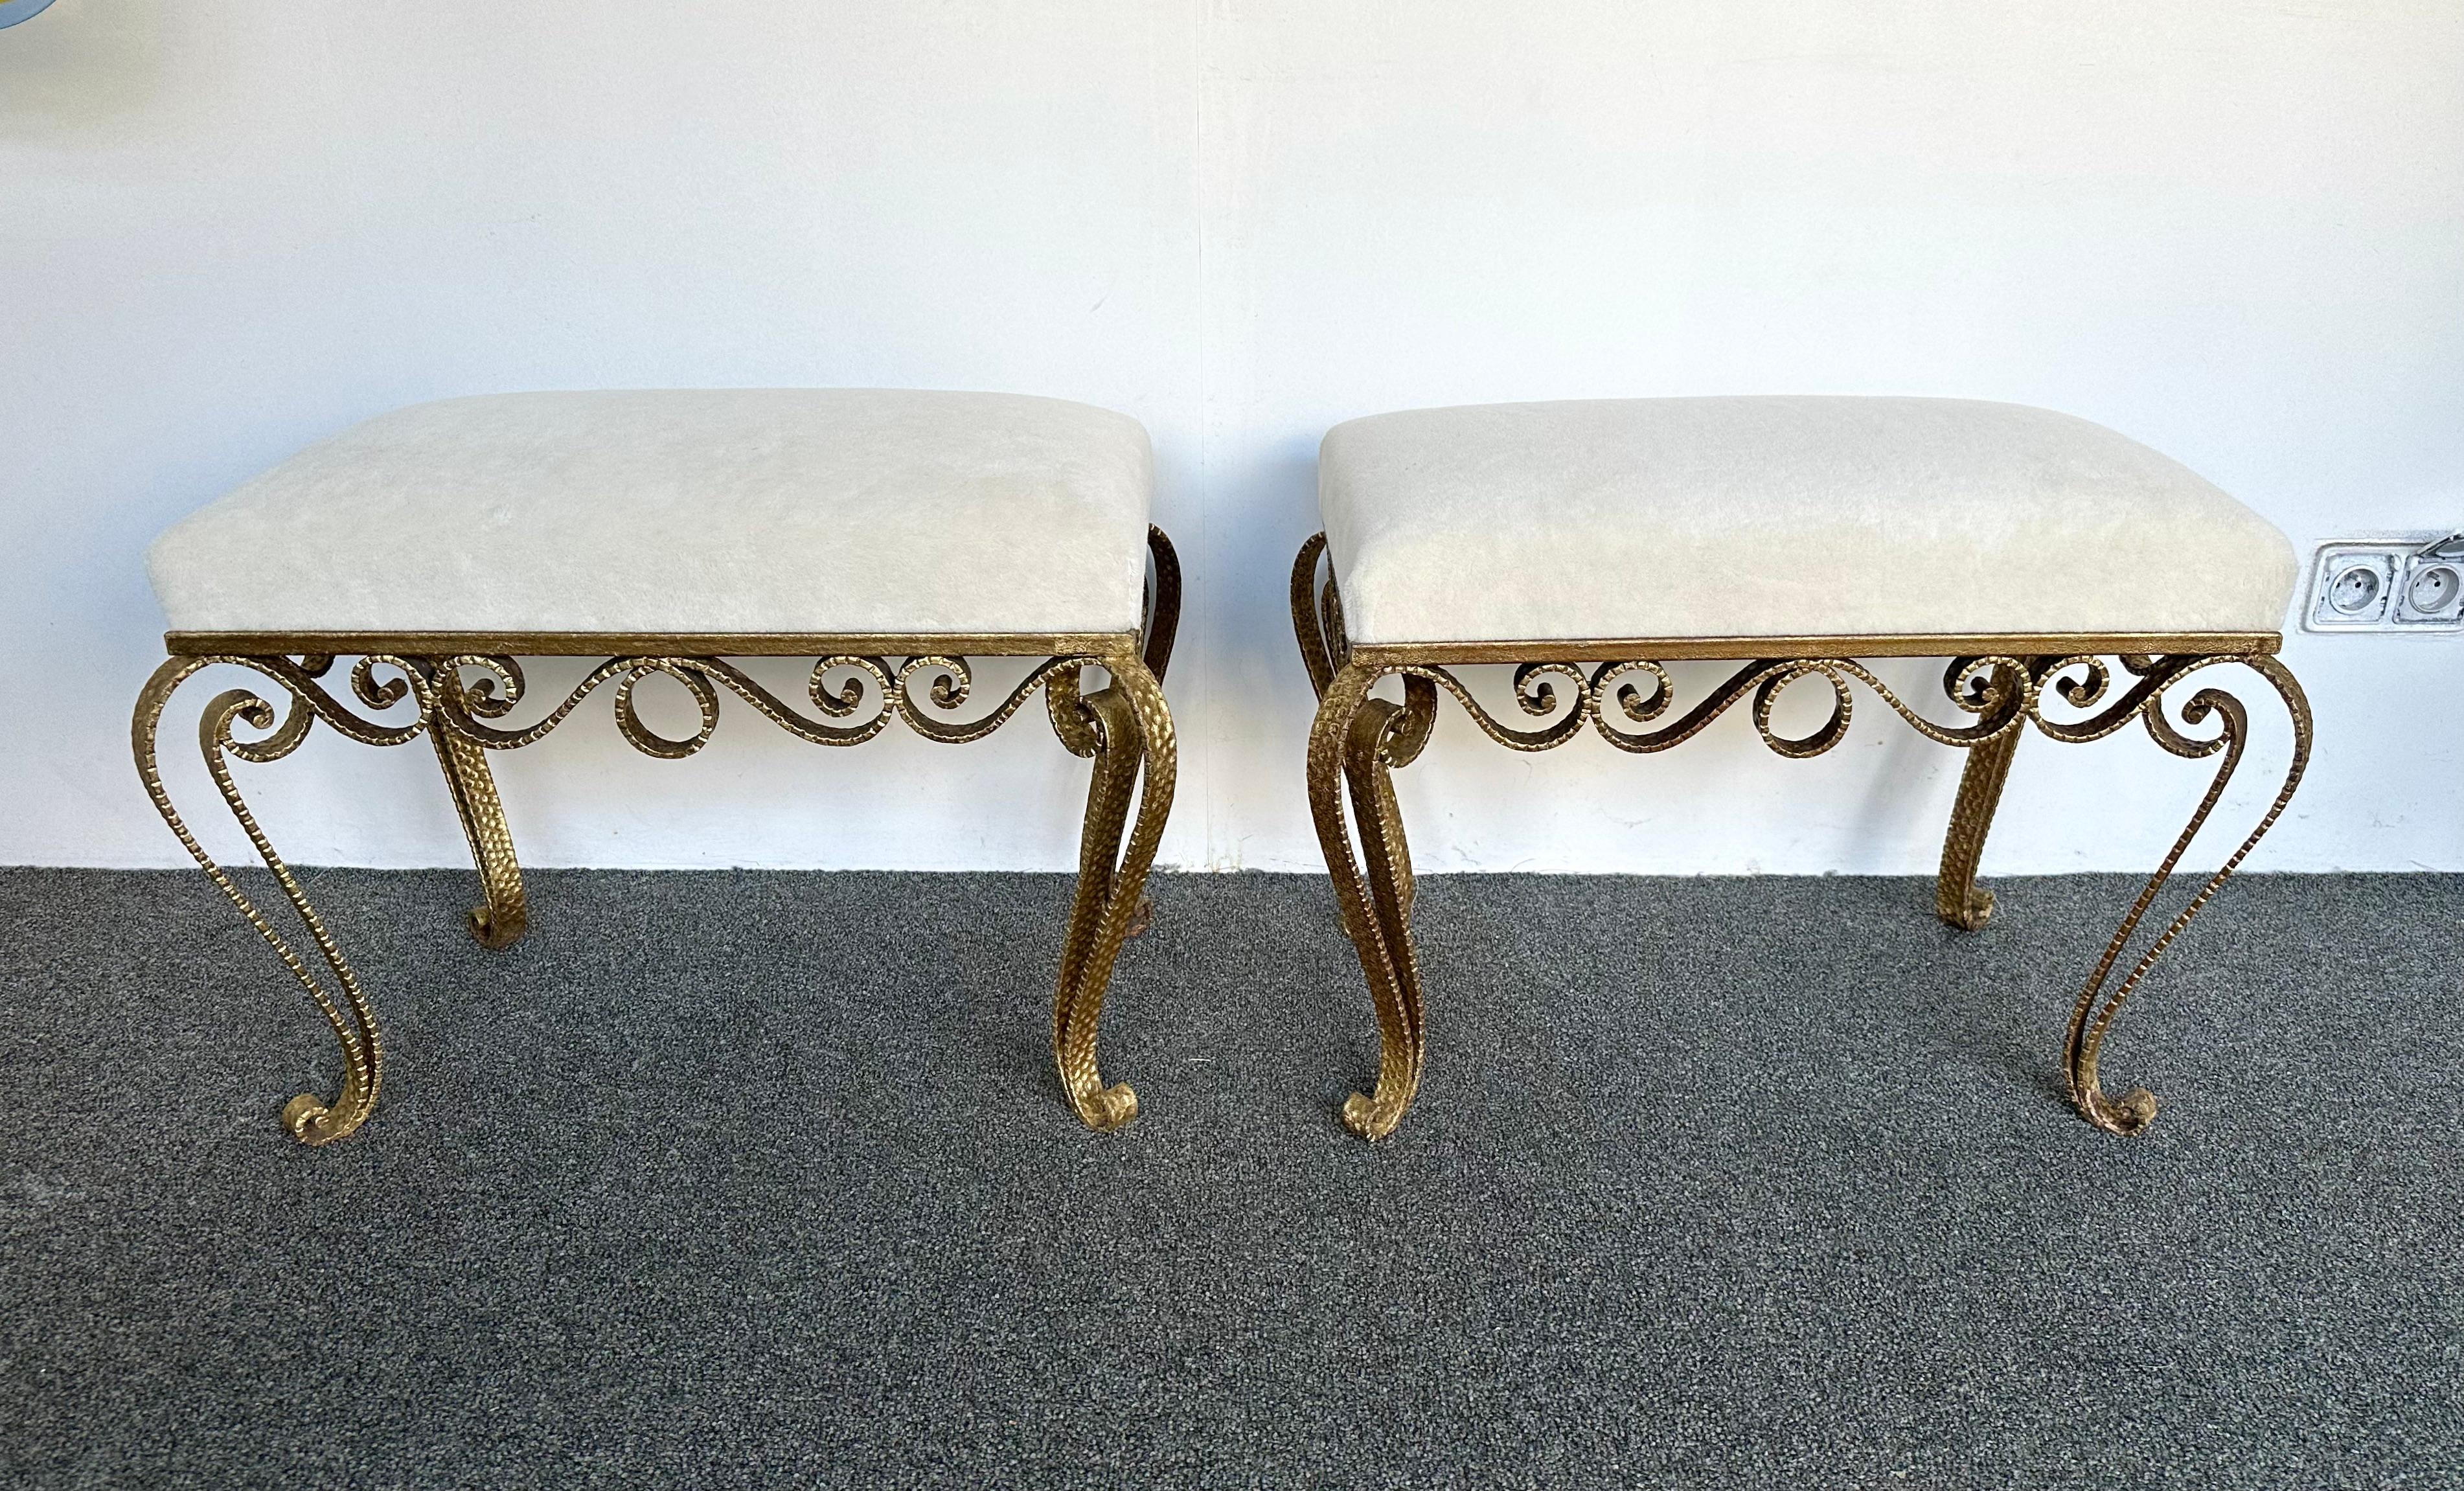 Large version of Pair of stools, poufs or ottomans by Pier Luigi Colli. Hammered wrought iron and gold leaf. Fully upholstered with alpaca mohair fabric. Famous design like Maison Jansen, Baguès, Gilbert Poillerat, Raymond Subes, Thibier, Art Deco,